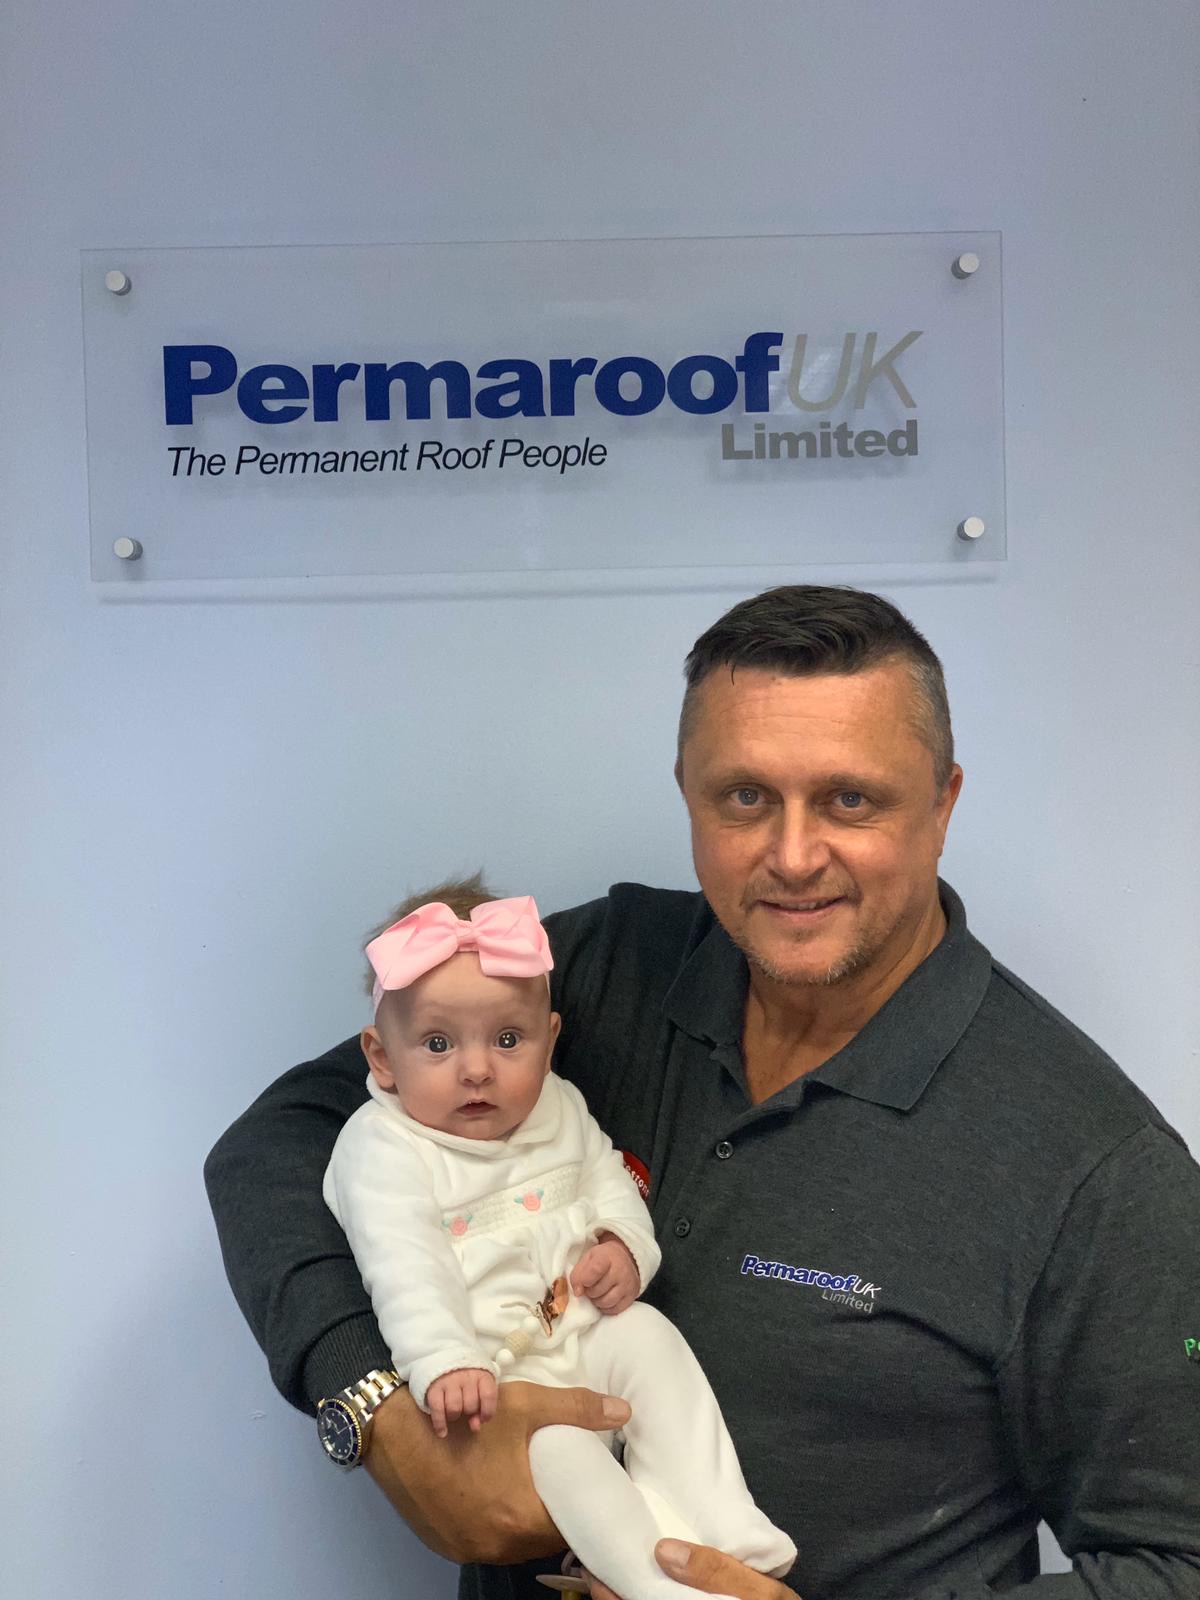 PERMAROOF ANNOUNCES SUPPORT FOR CHARITY CLOSE TO ITS HEART @PermaroofUK